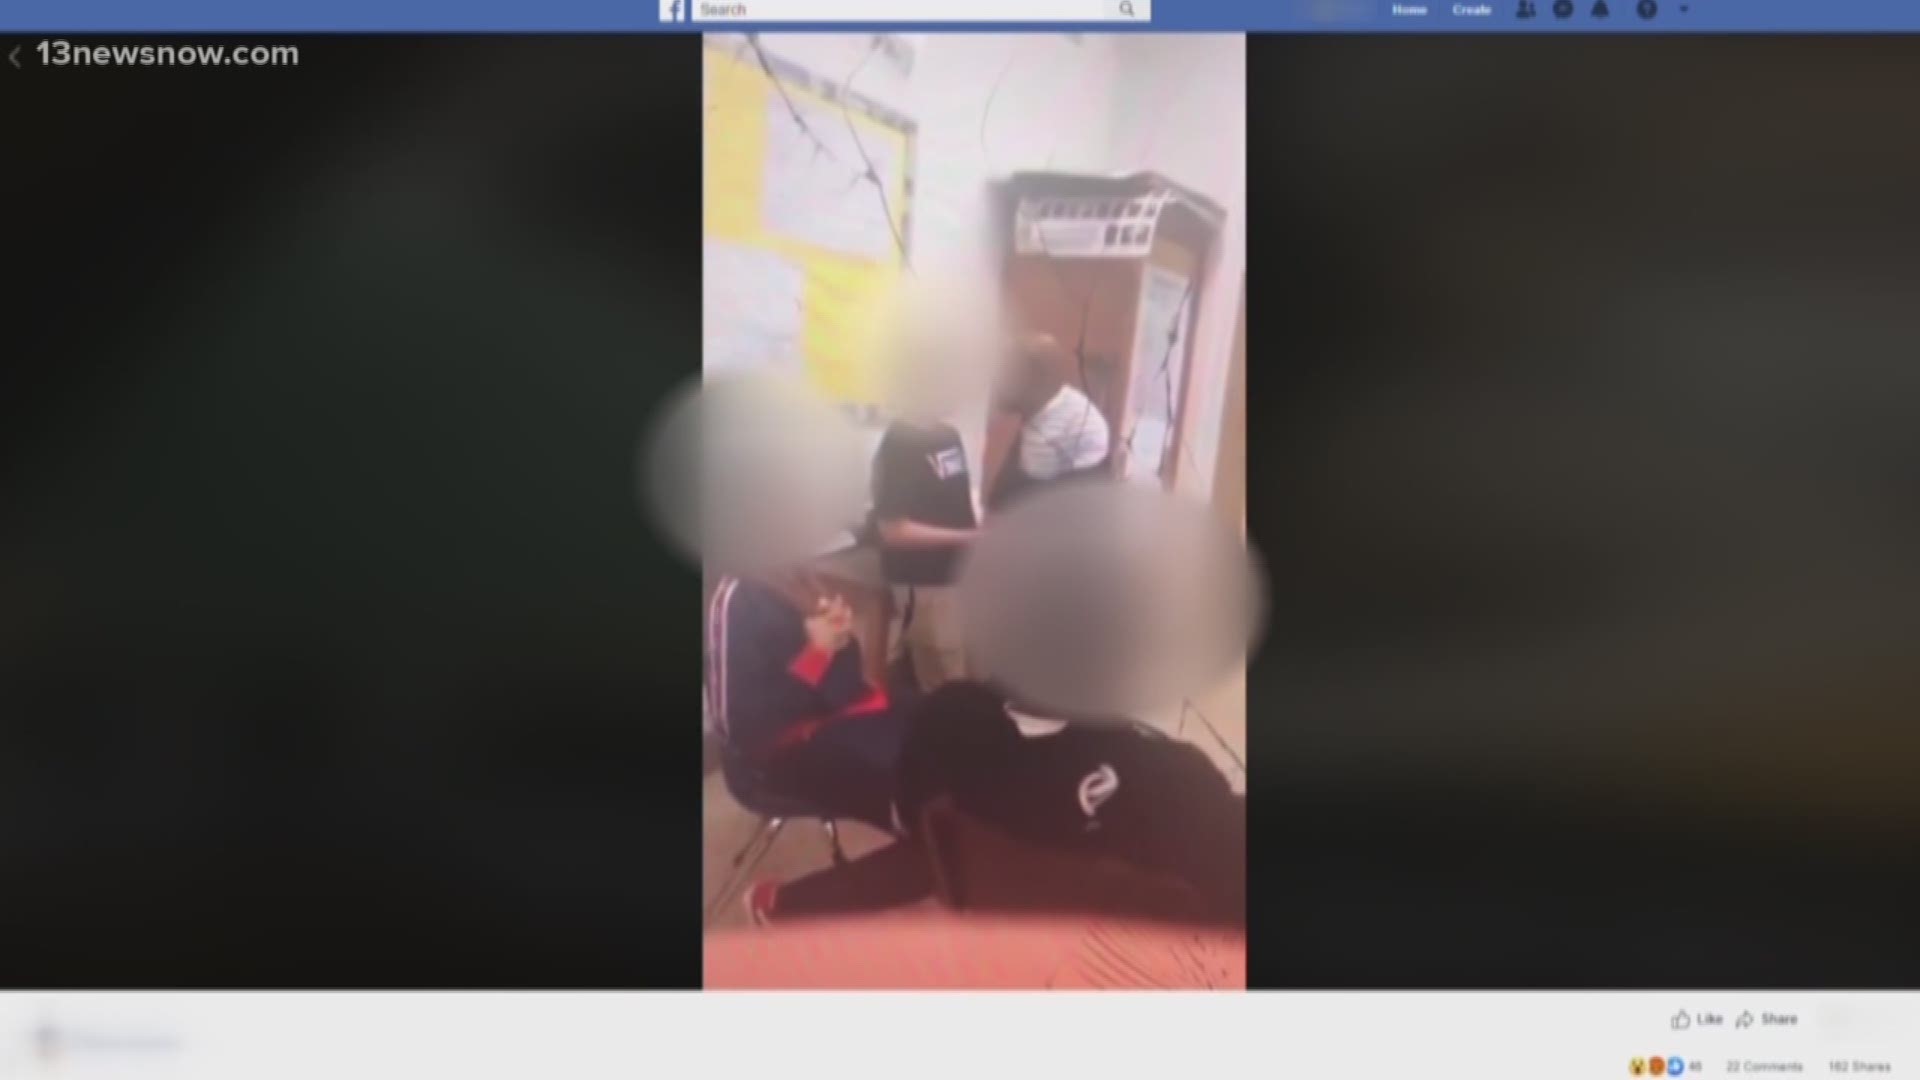 13News Now Adriana De Alba has more on a video that surfaced catching a teacher at Kempsville Middle School aggressively confronting students.